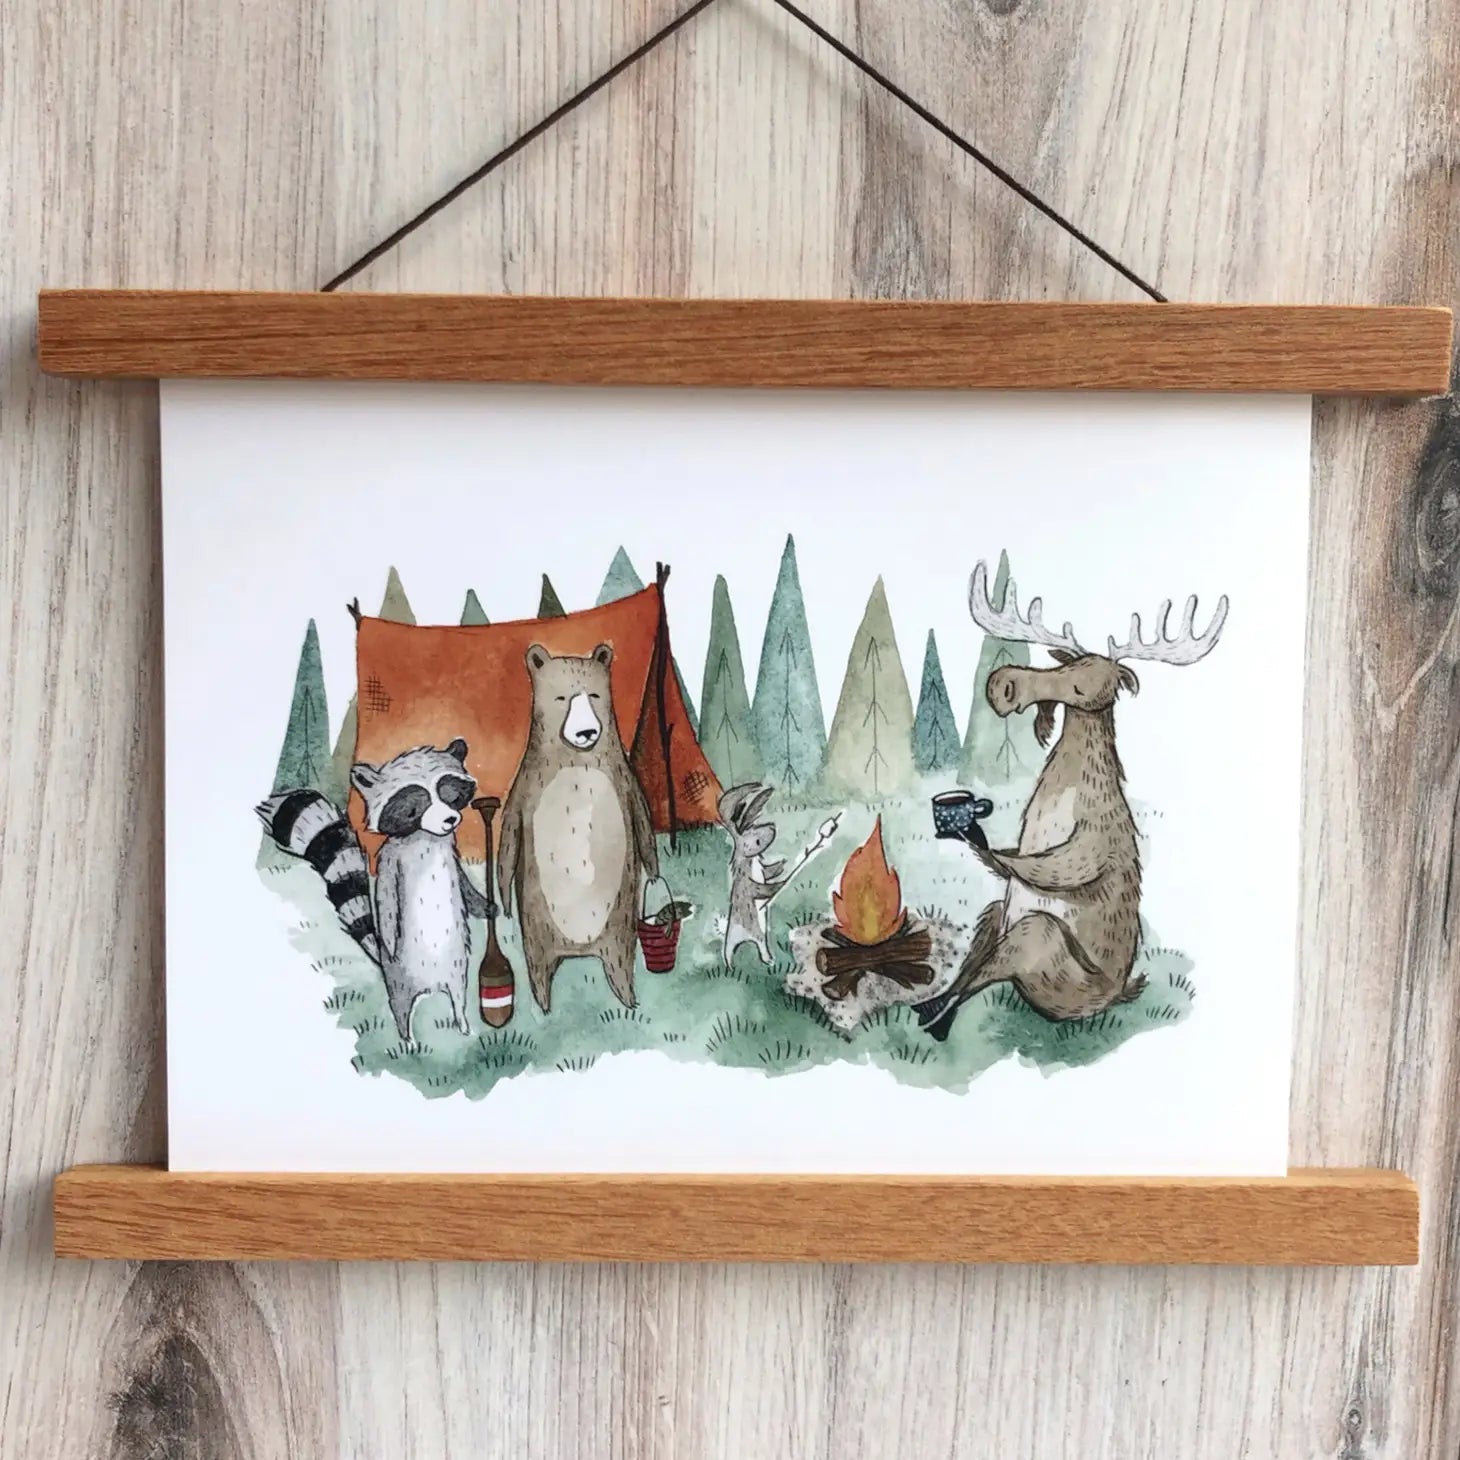 Gathering Friends Print - 8x10 Art Print - Created by Little Pine Artistry Canyon & Cove